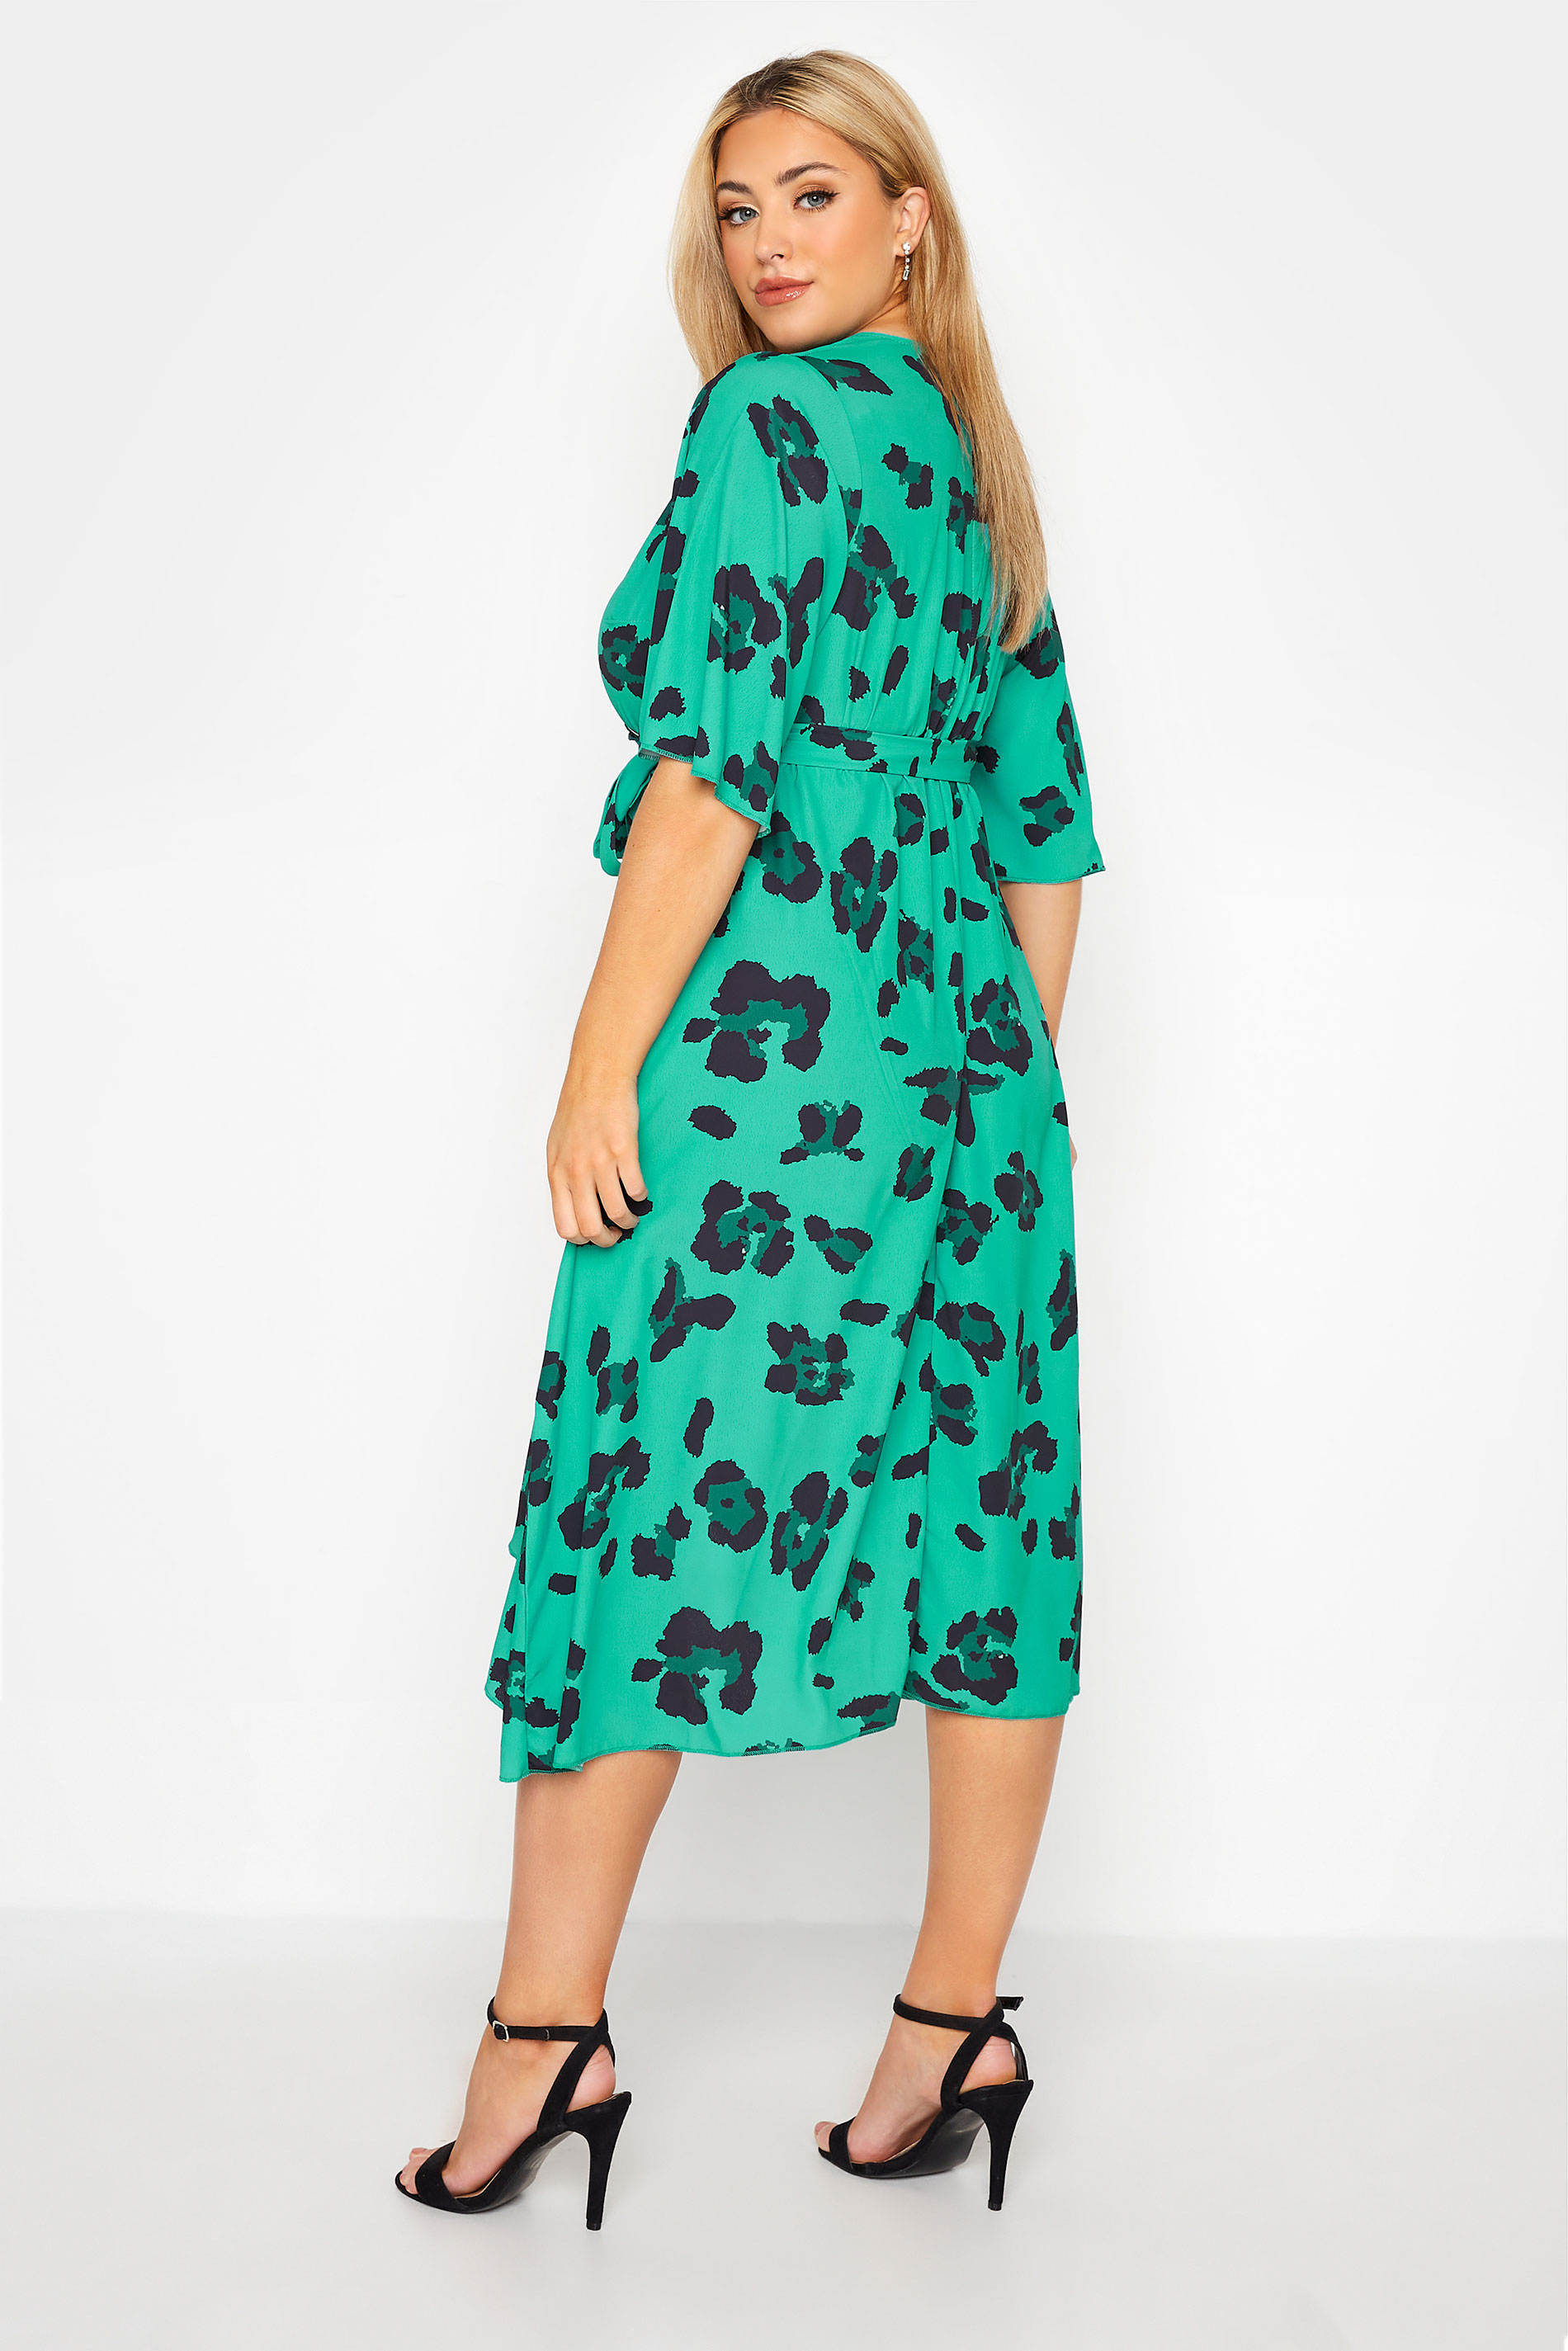 Robes Grande Taille Grande taille  Robes Portefeuilles | YOURS LONDON - Robe Verte Léopard Style Portefeuille - XL89952